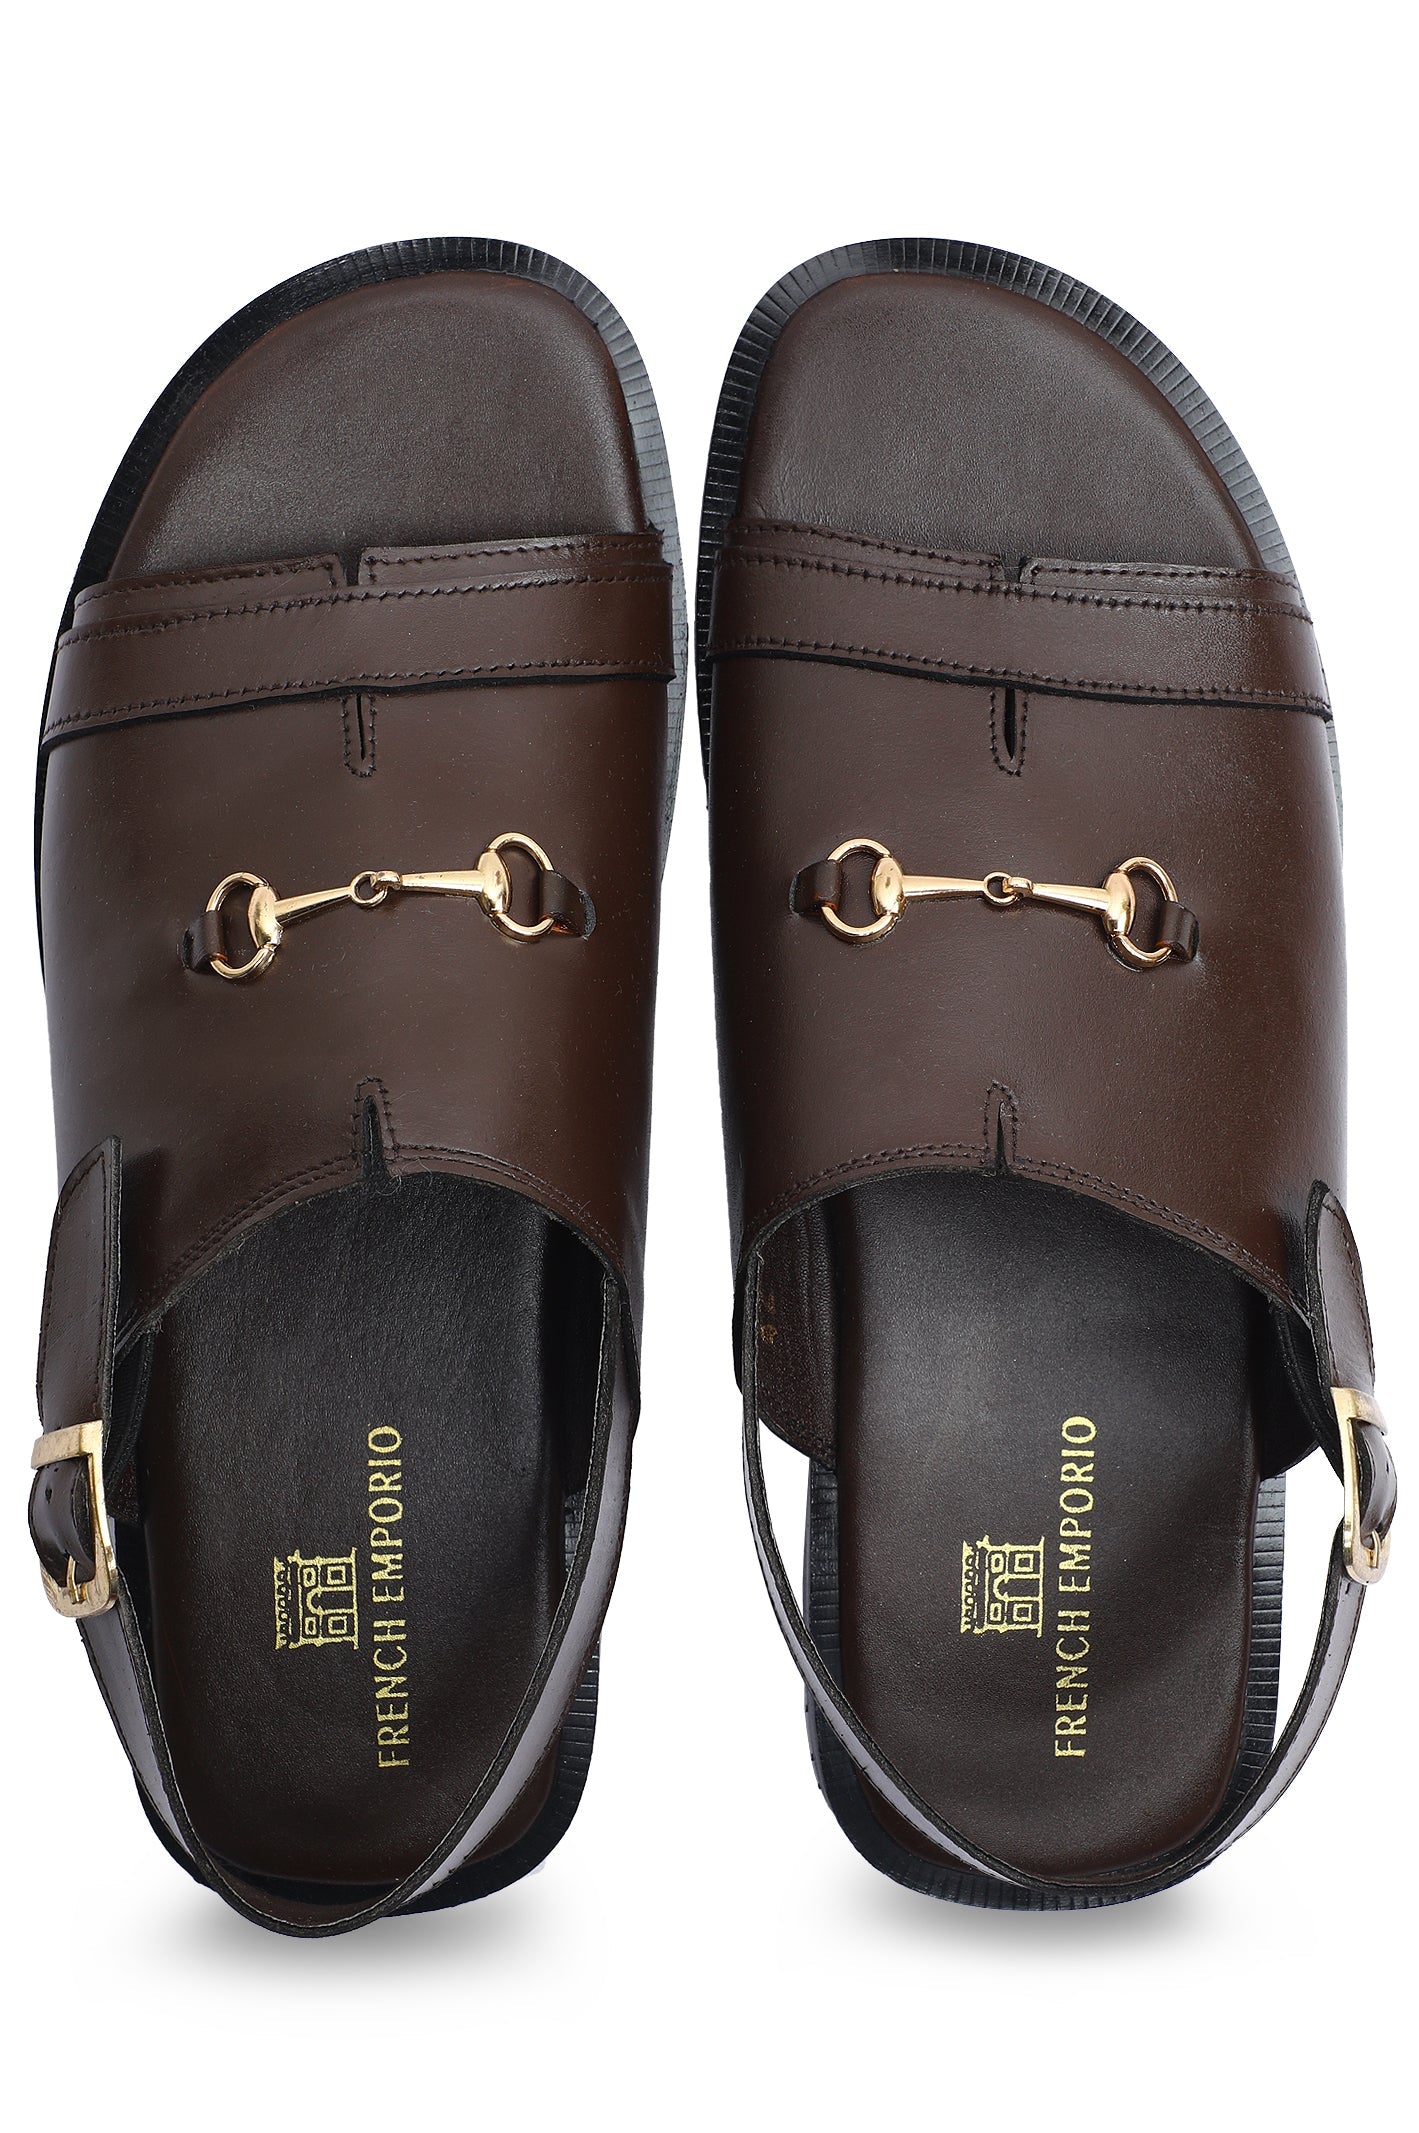 French Emporio Men's Sandal SKU: SLD-0042-COFFEE - Diners